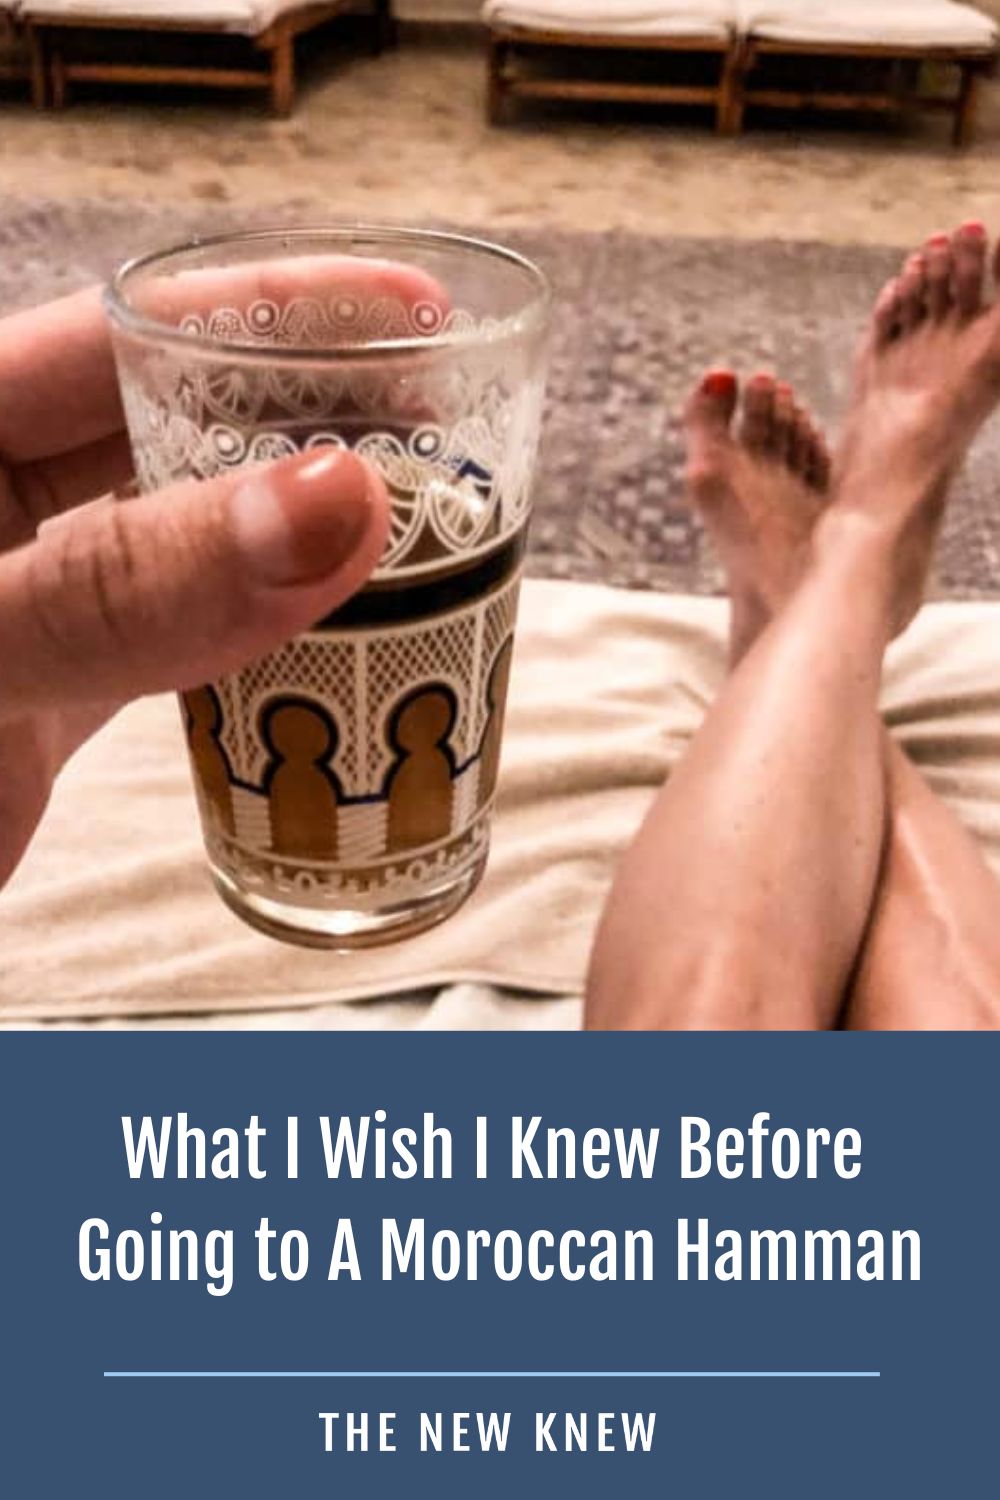 5 Things I Wish I Knew Before Going To A Moroccan Hammam picture